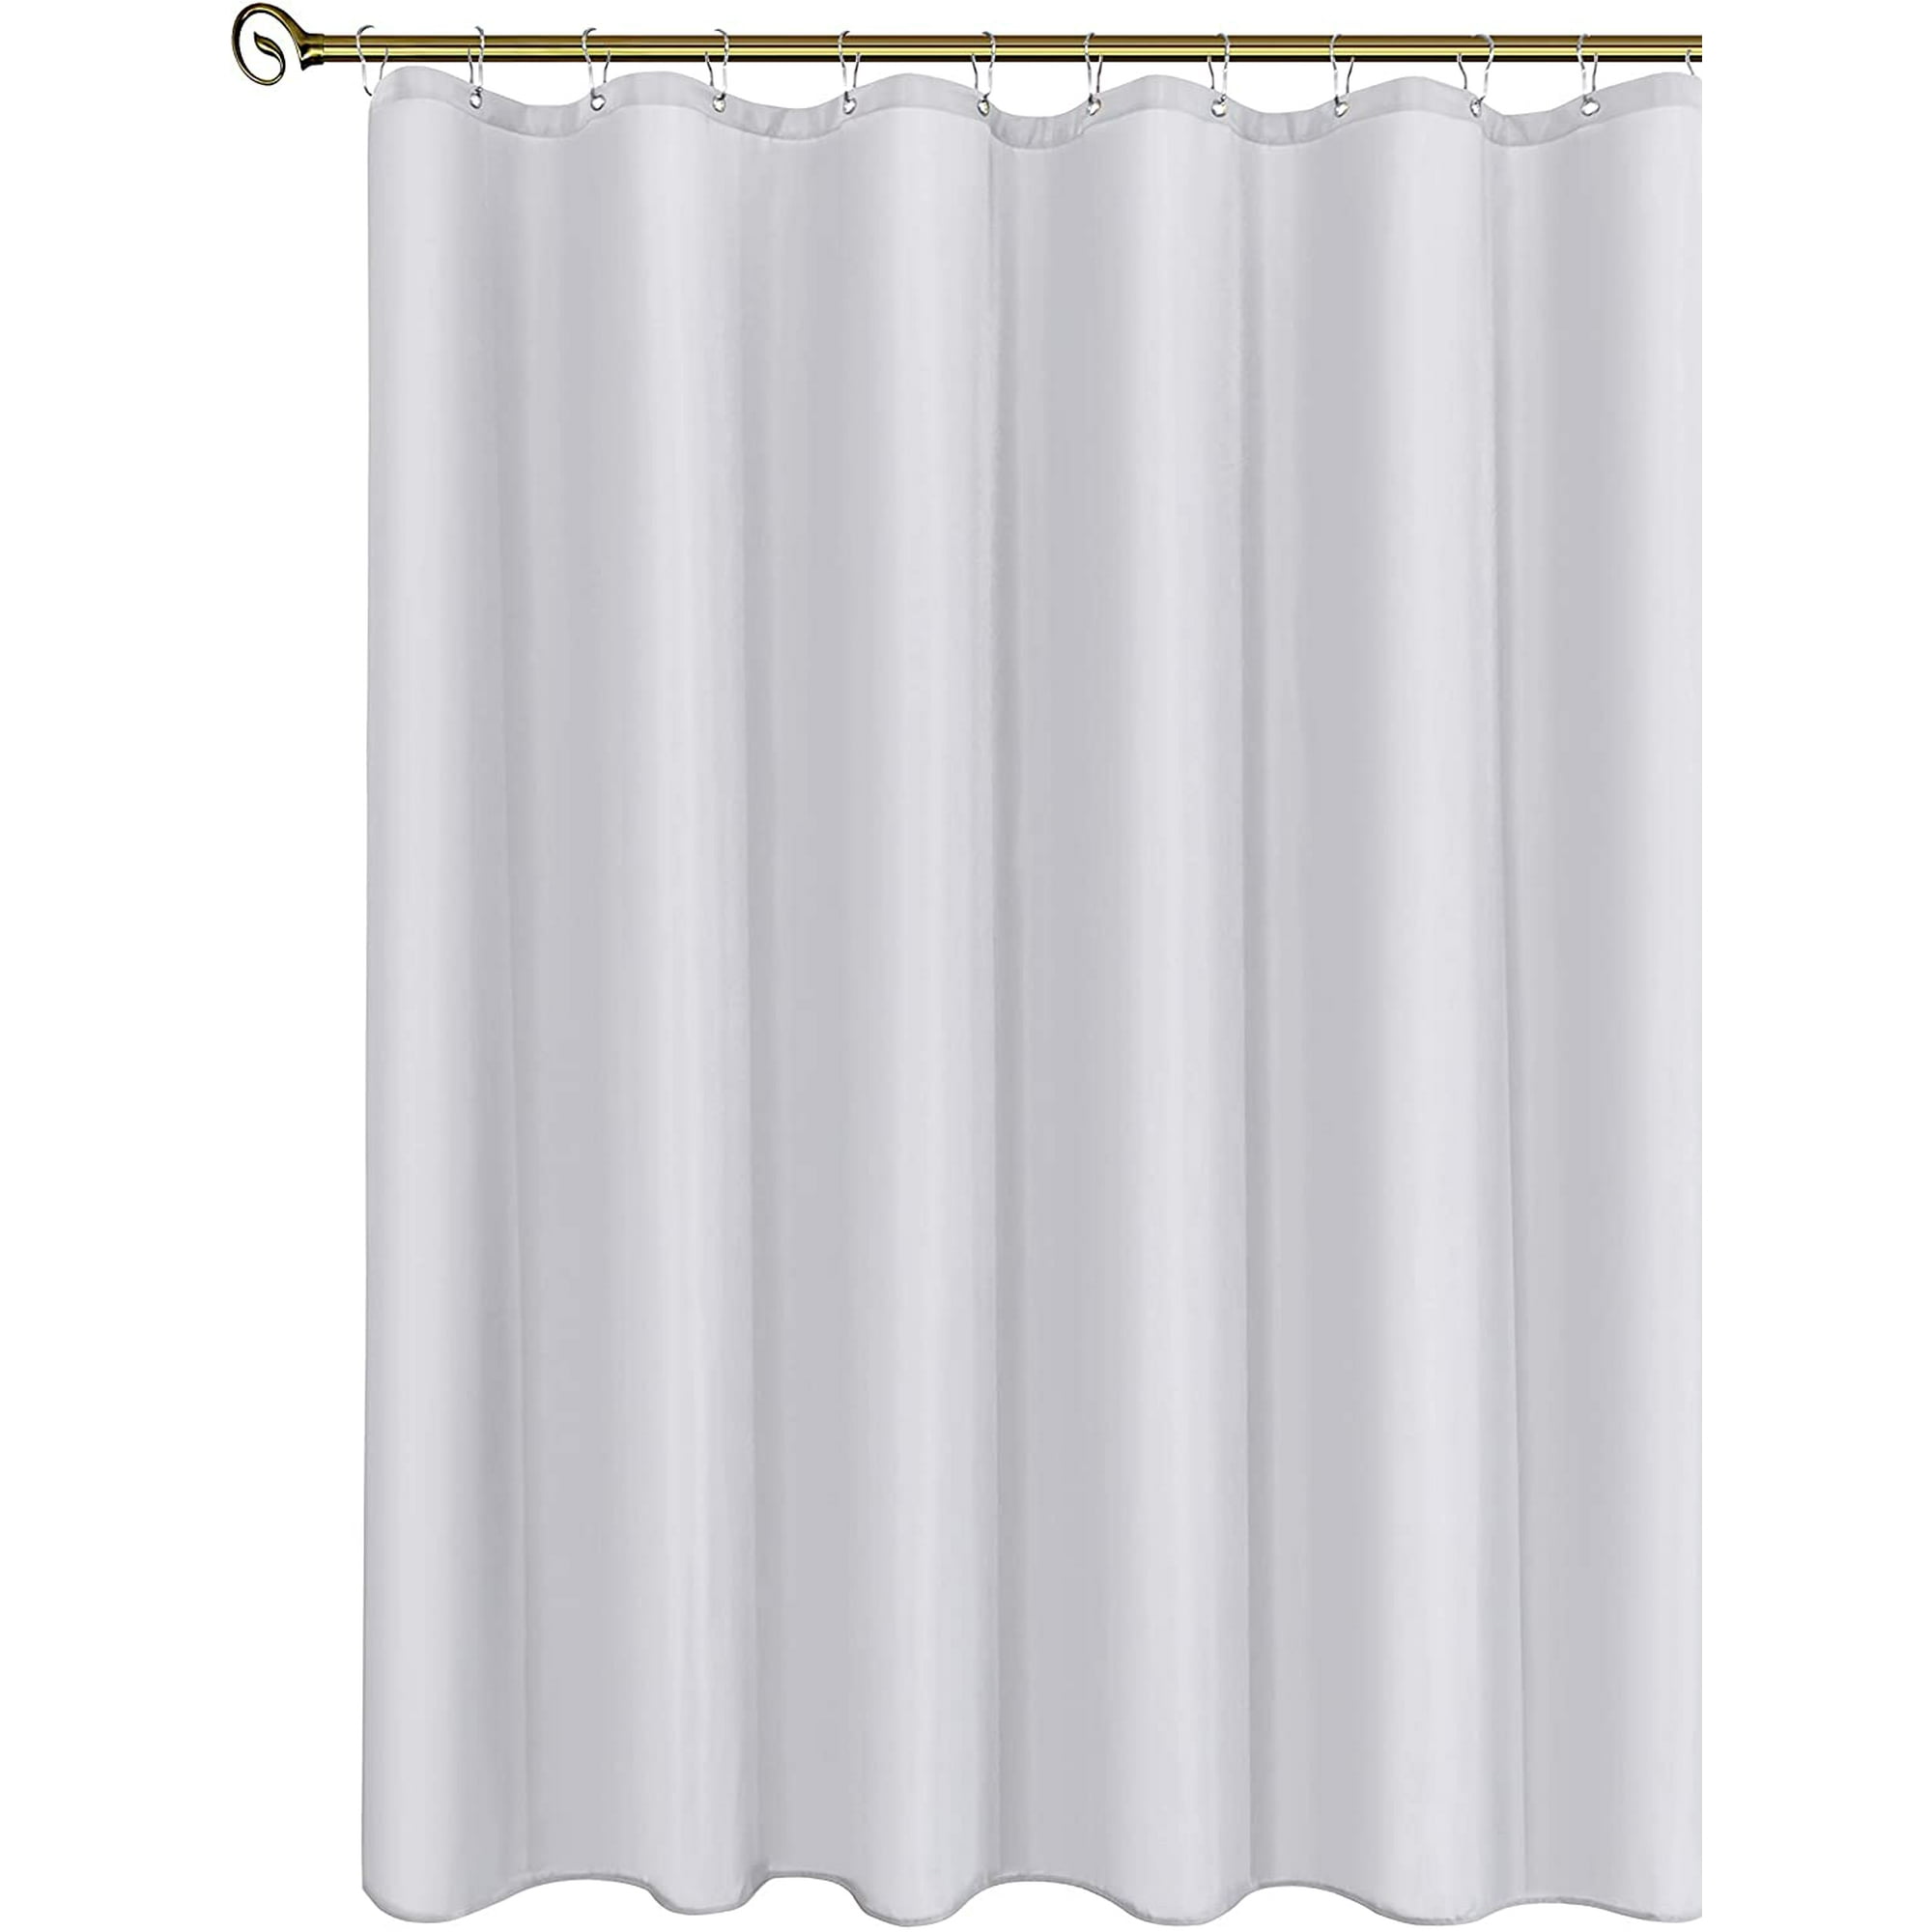 Narrow Shower Stall Curtain Liners, 36 Inch Shower Stall Curtains